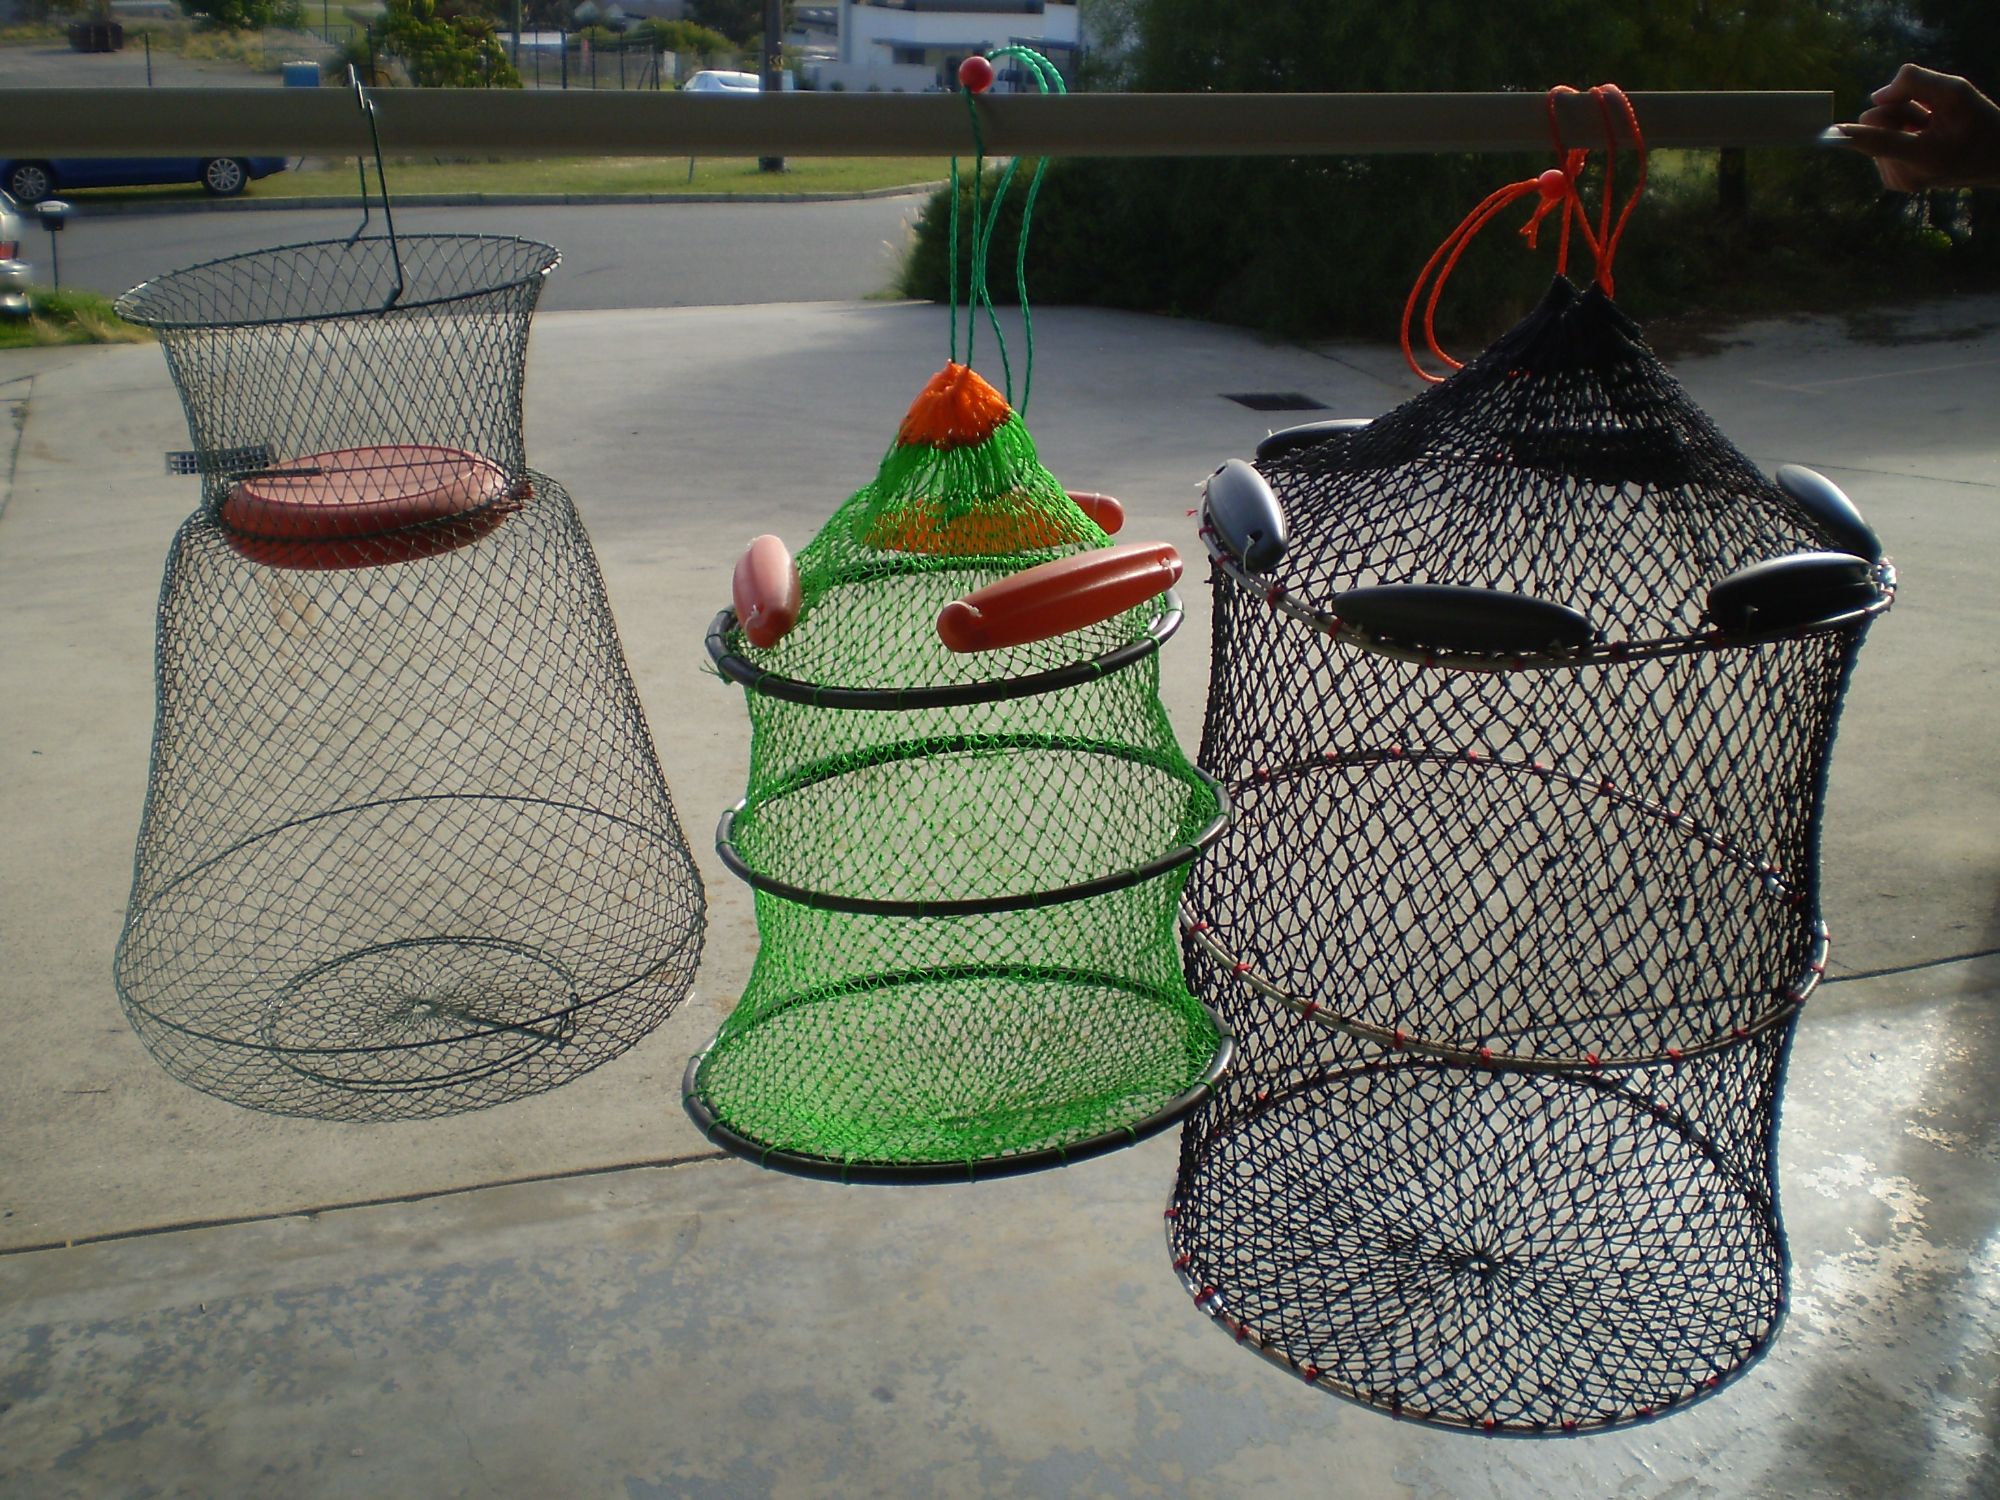 Live Bait Holders For Sale in Perth, Western Australia